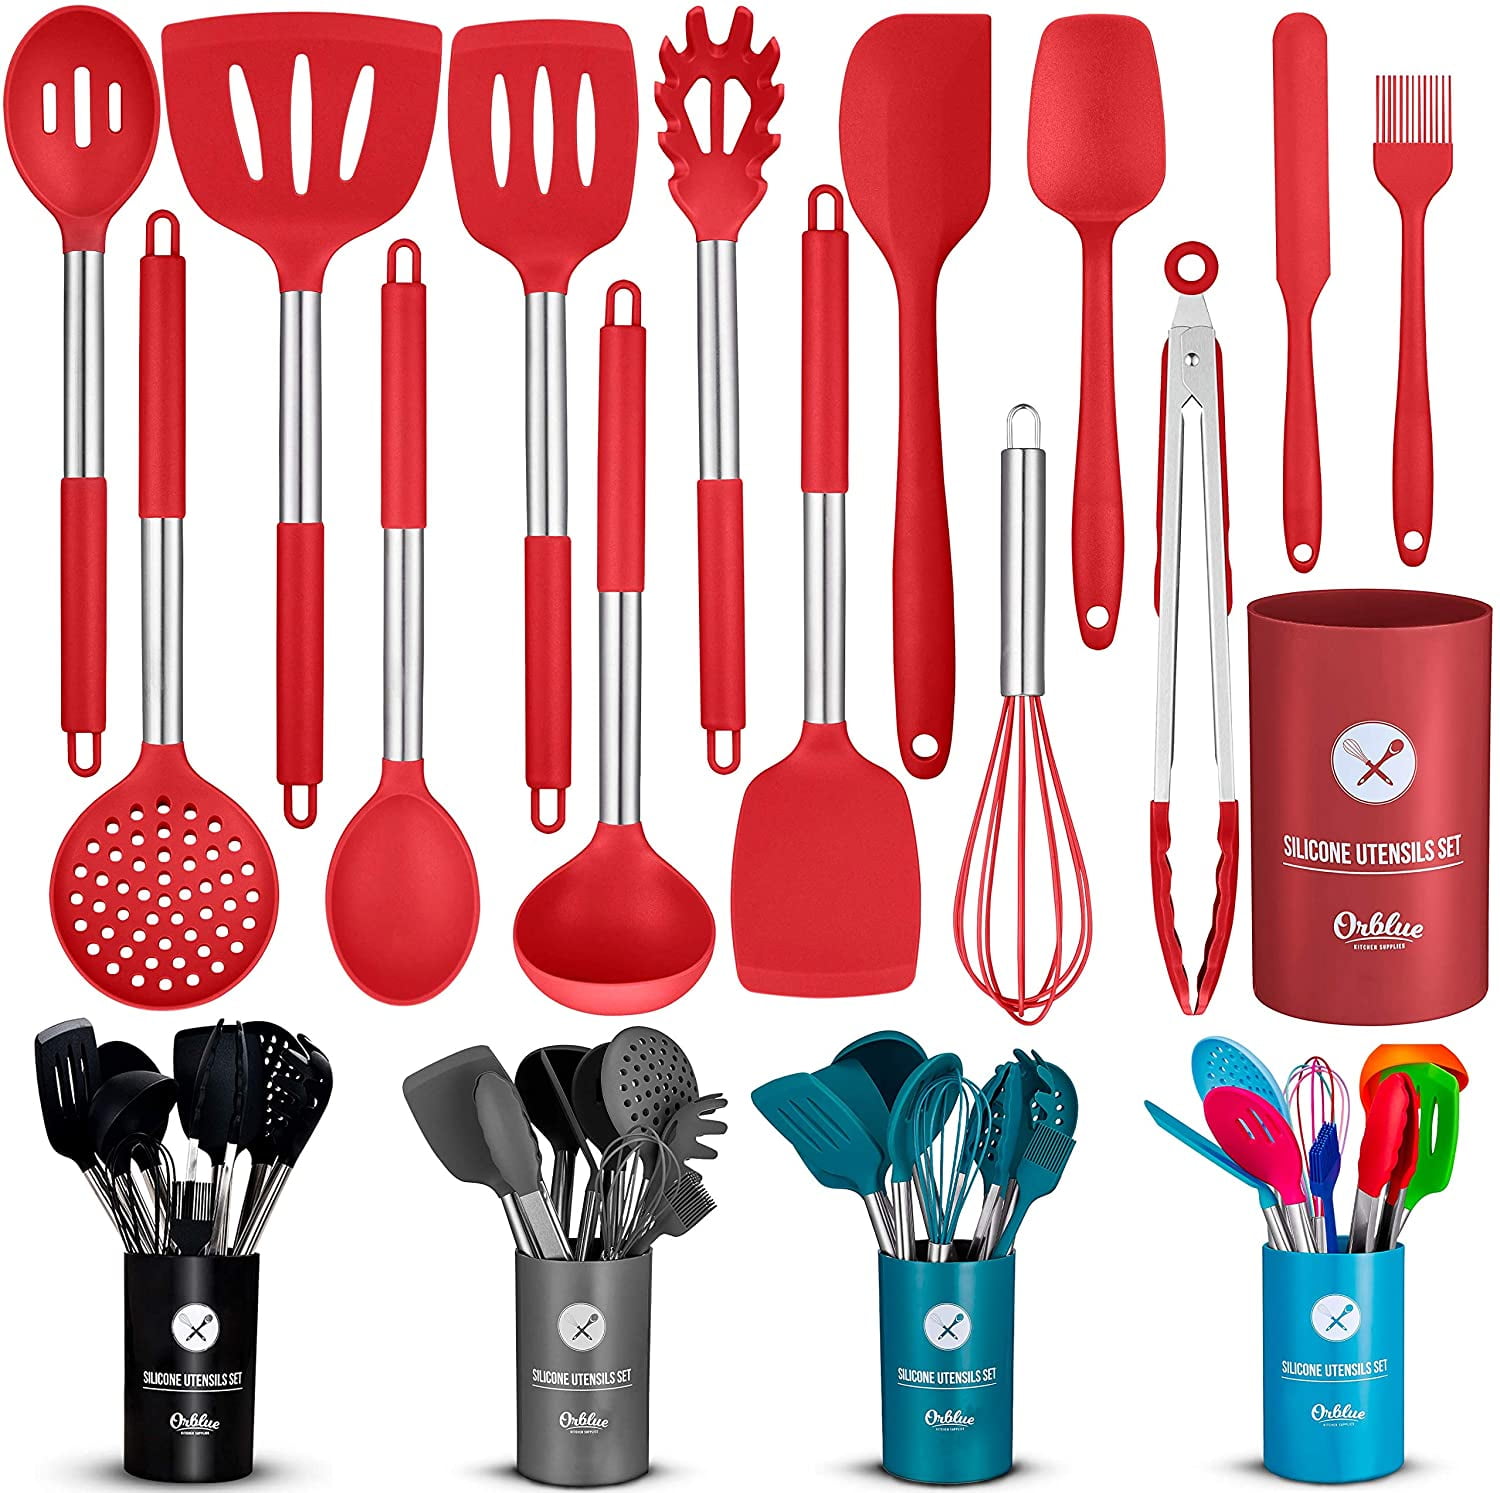 Are Silicone kitchen utensils and bakeware safe for food contact? - HB  Silicone